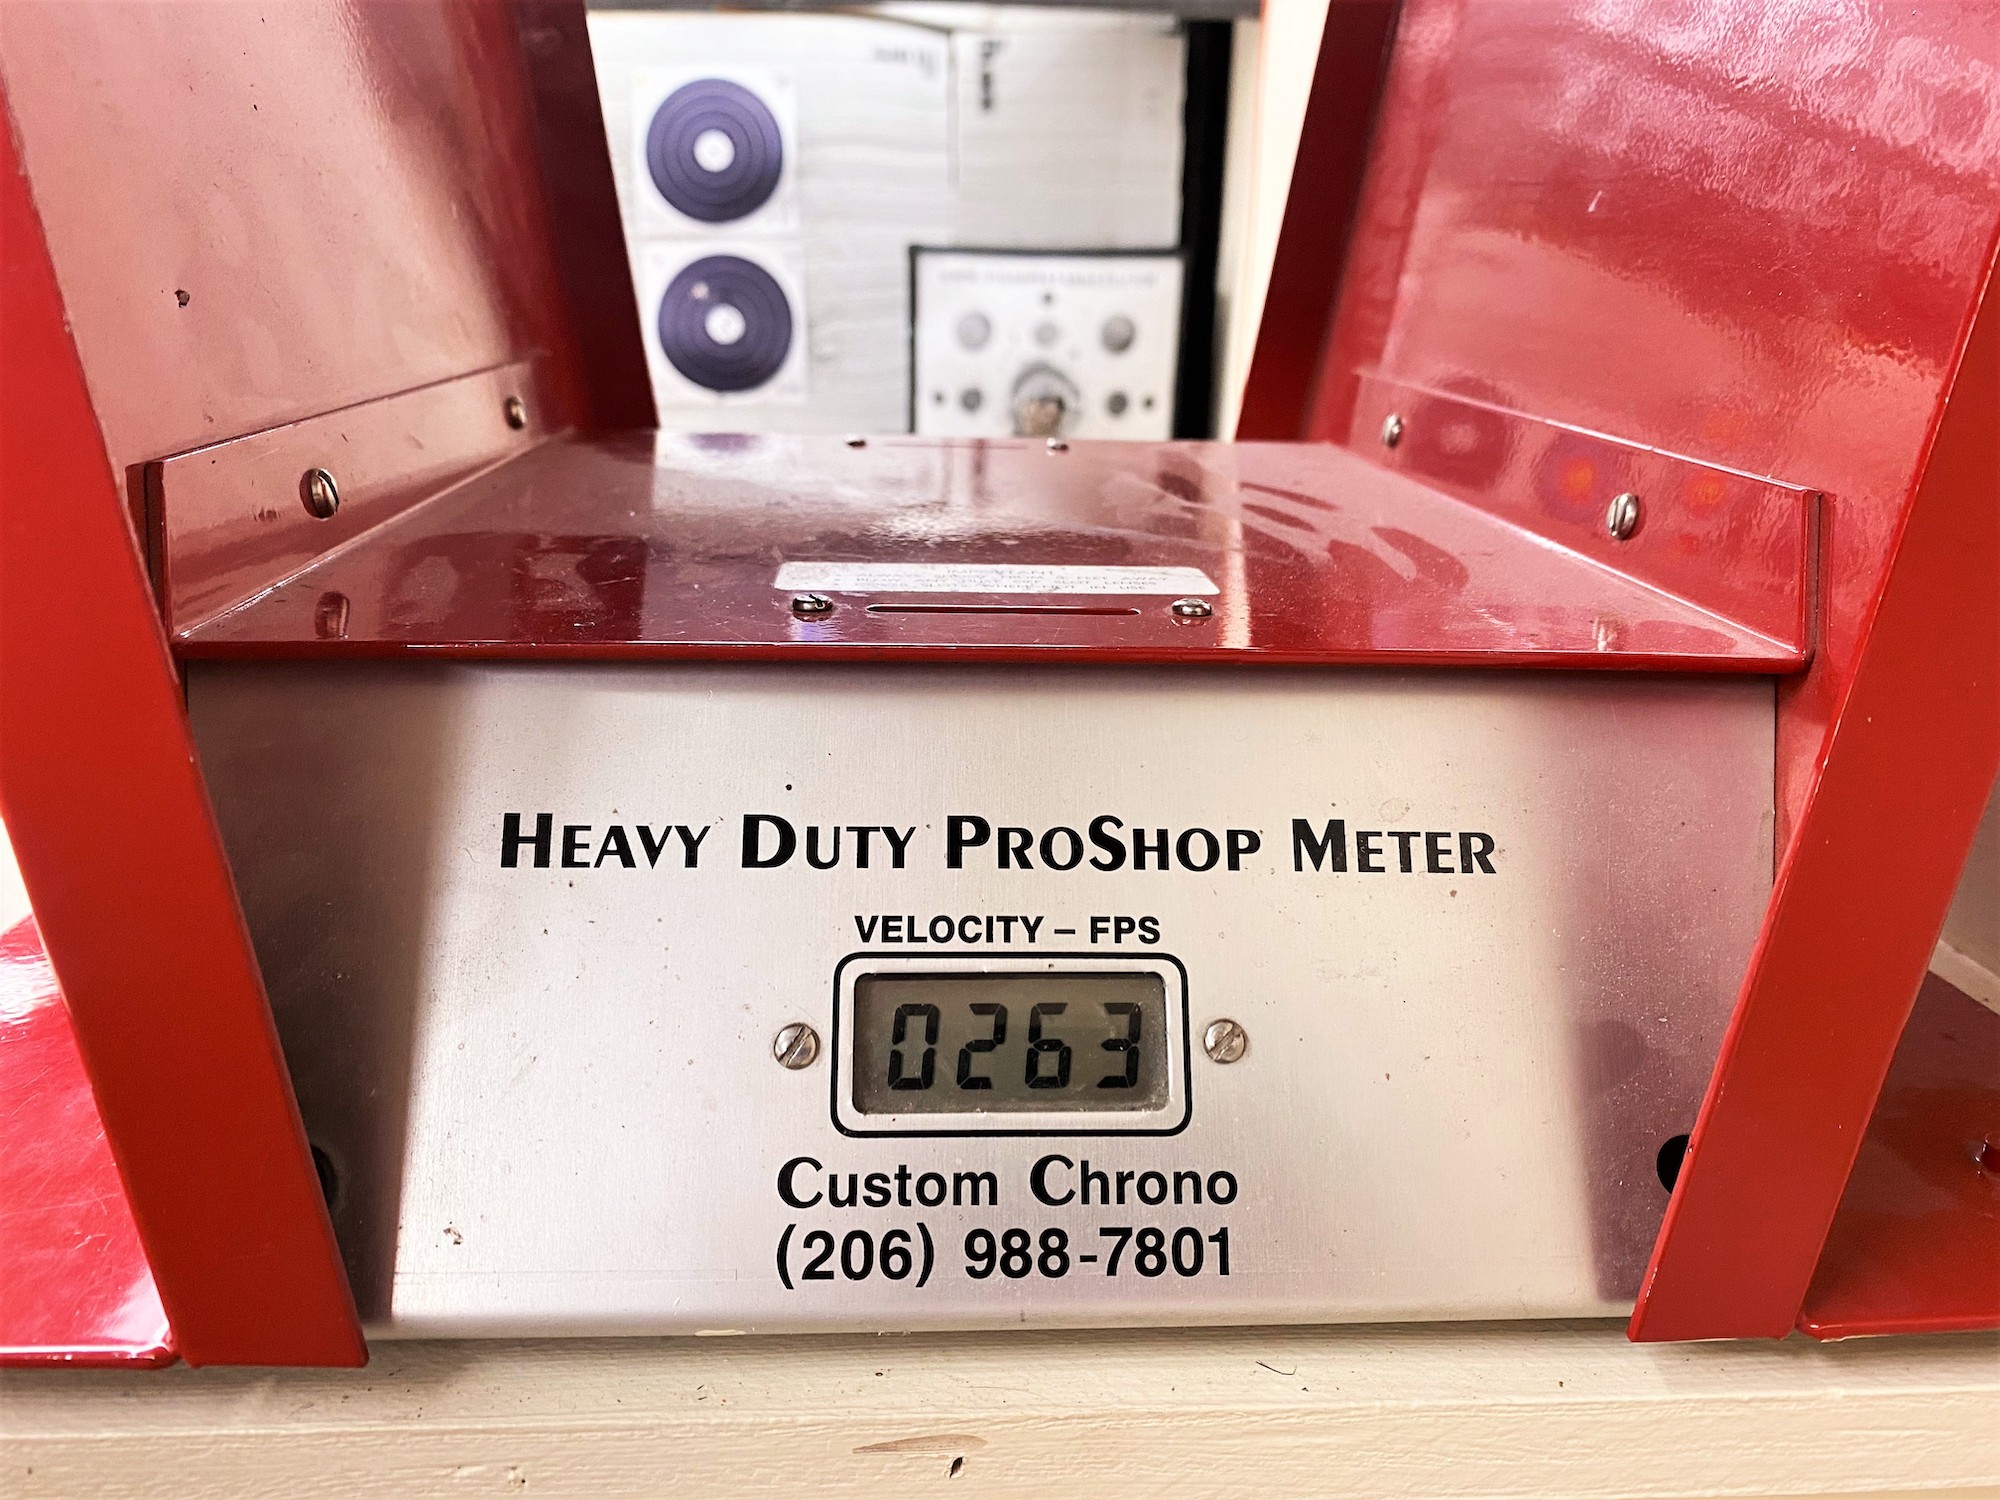 A close-up of a red and silver Custom Chrono Heavy Duty ProShop Meter